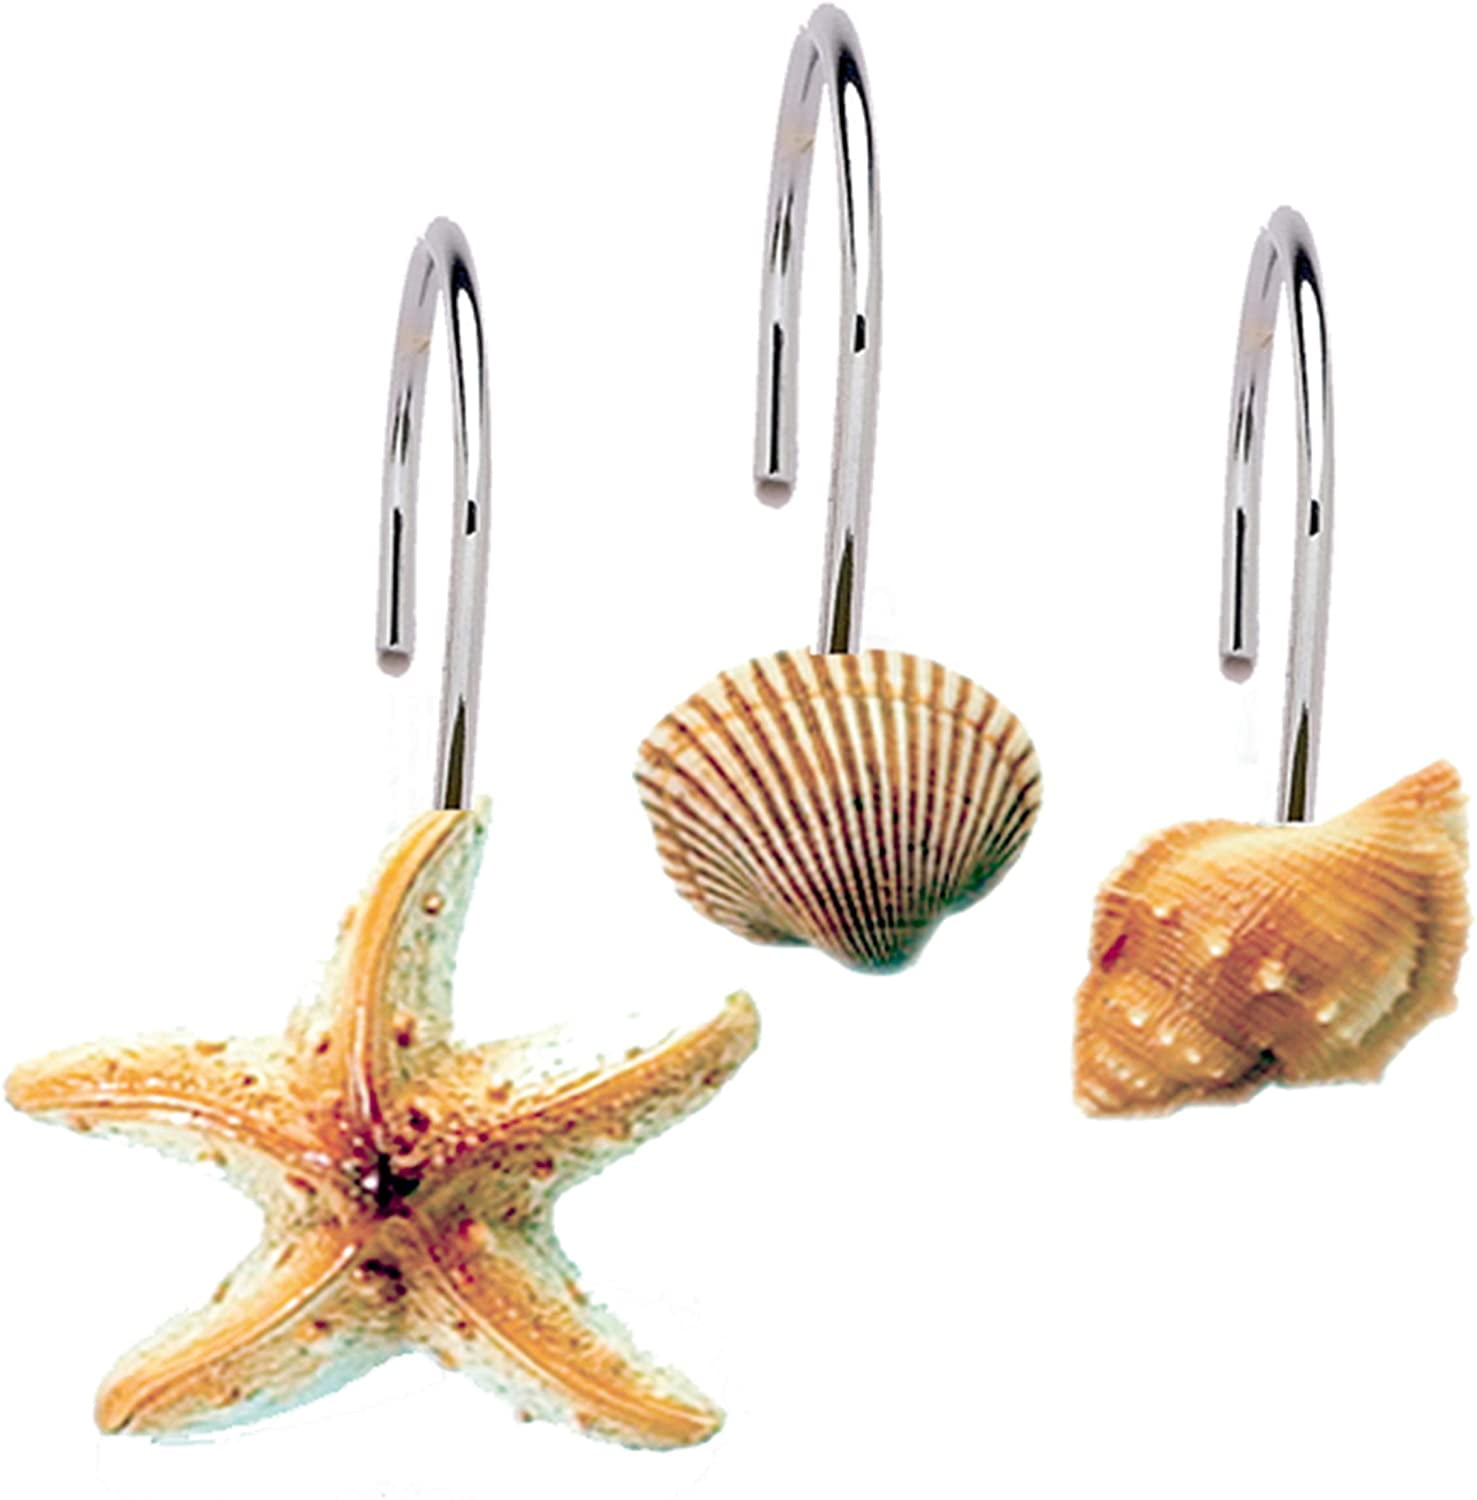 Details about   12 Pcs Seashell Anti Rust Decorative Resin Shower Curtain Rings Hooks for Bathro 